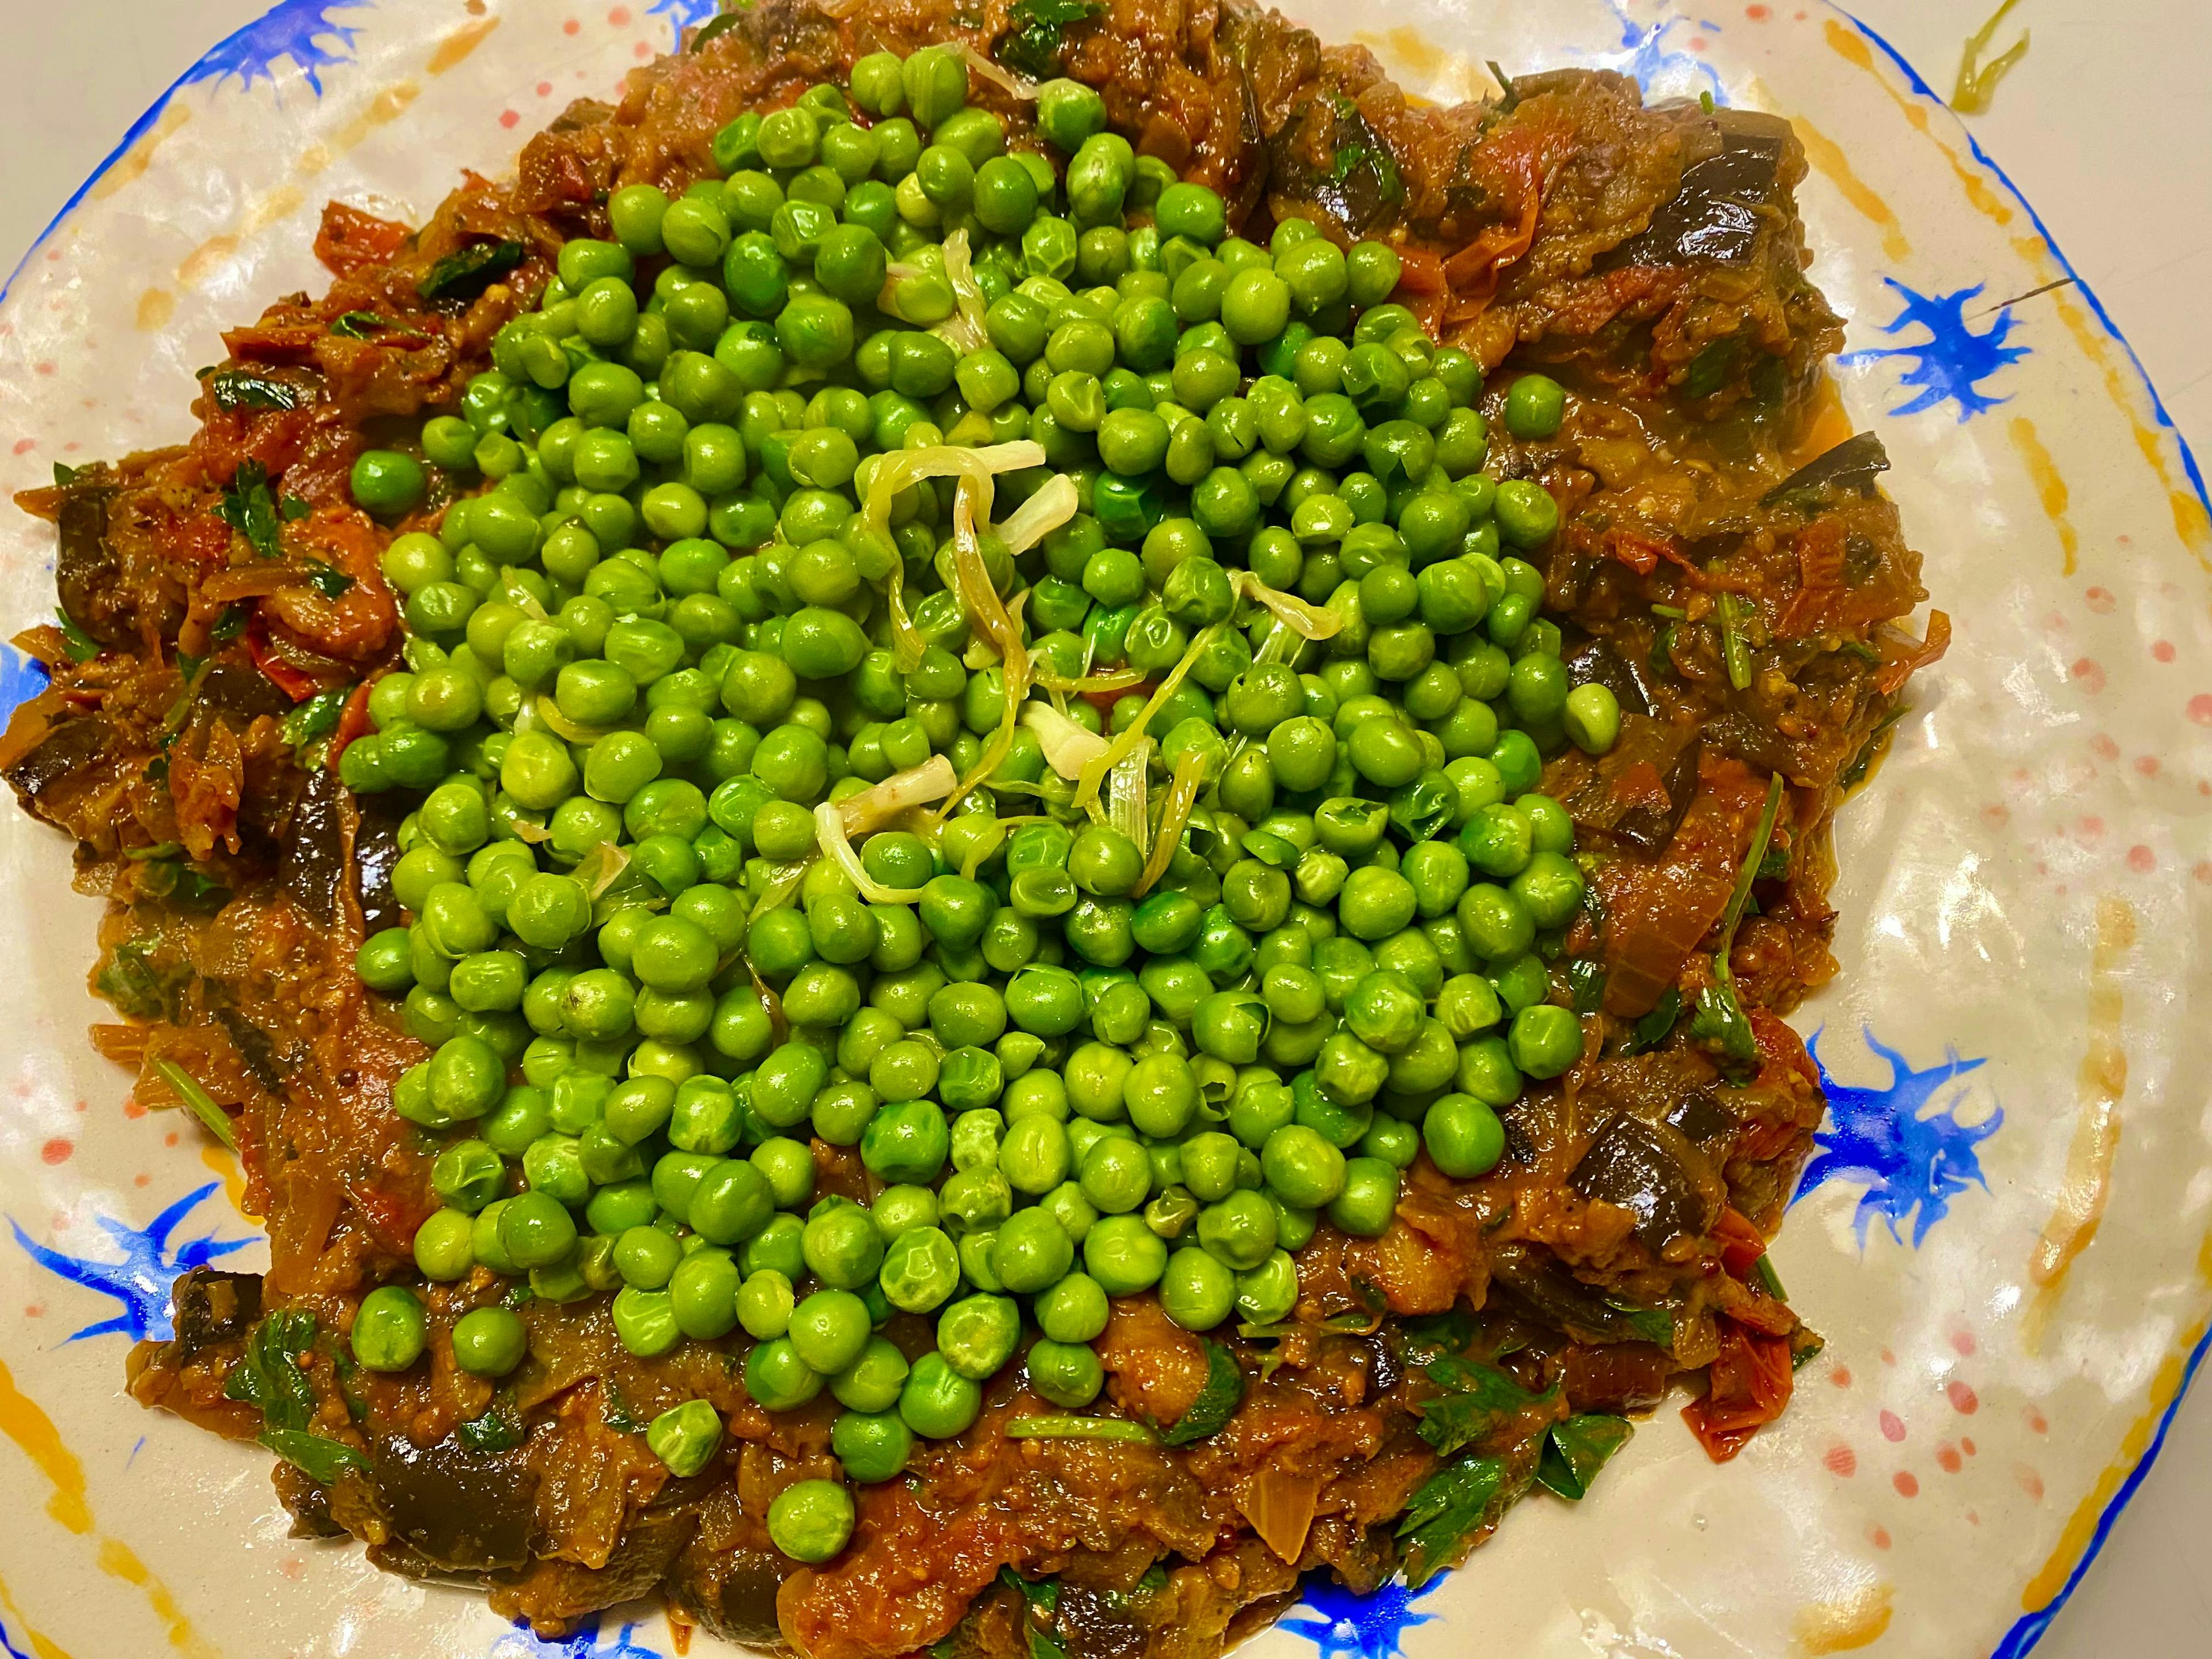 Fresh green peas on a bed of baked aubergines and tomatoes